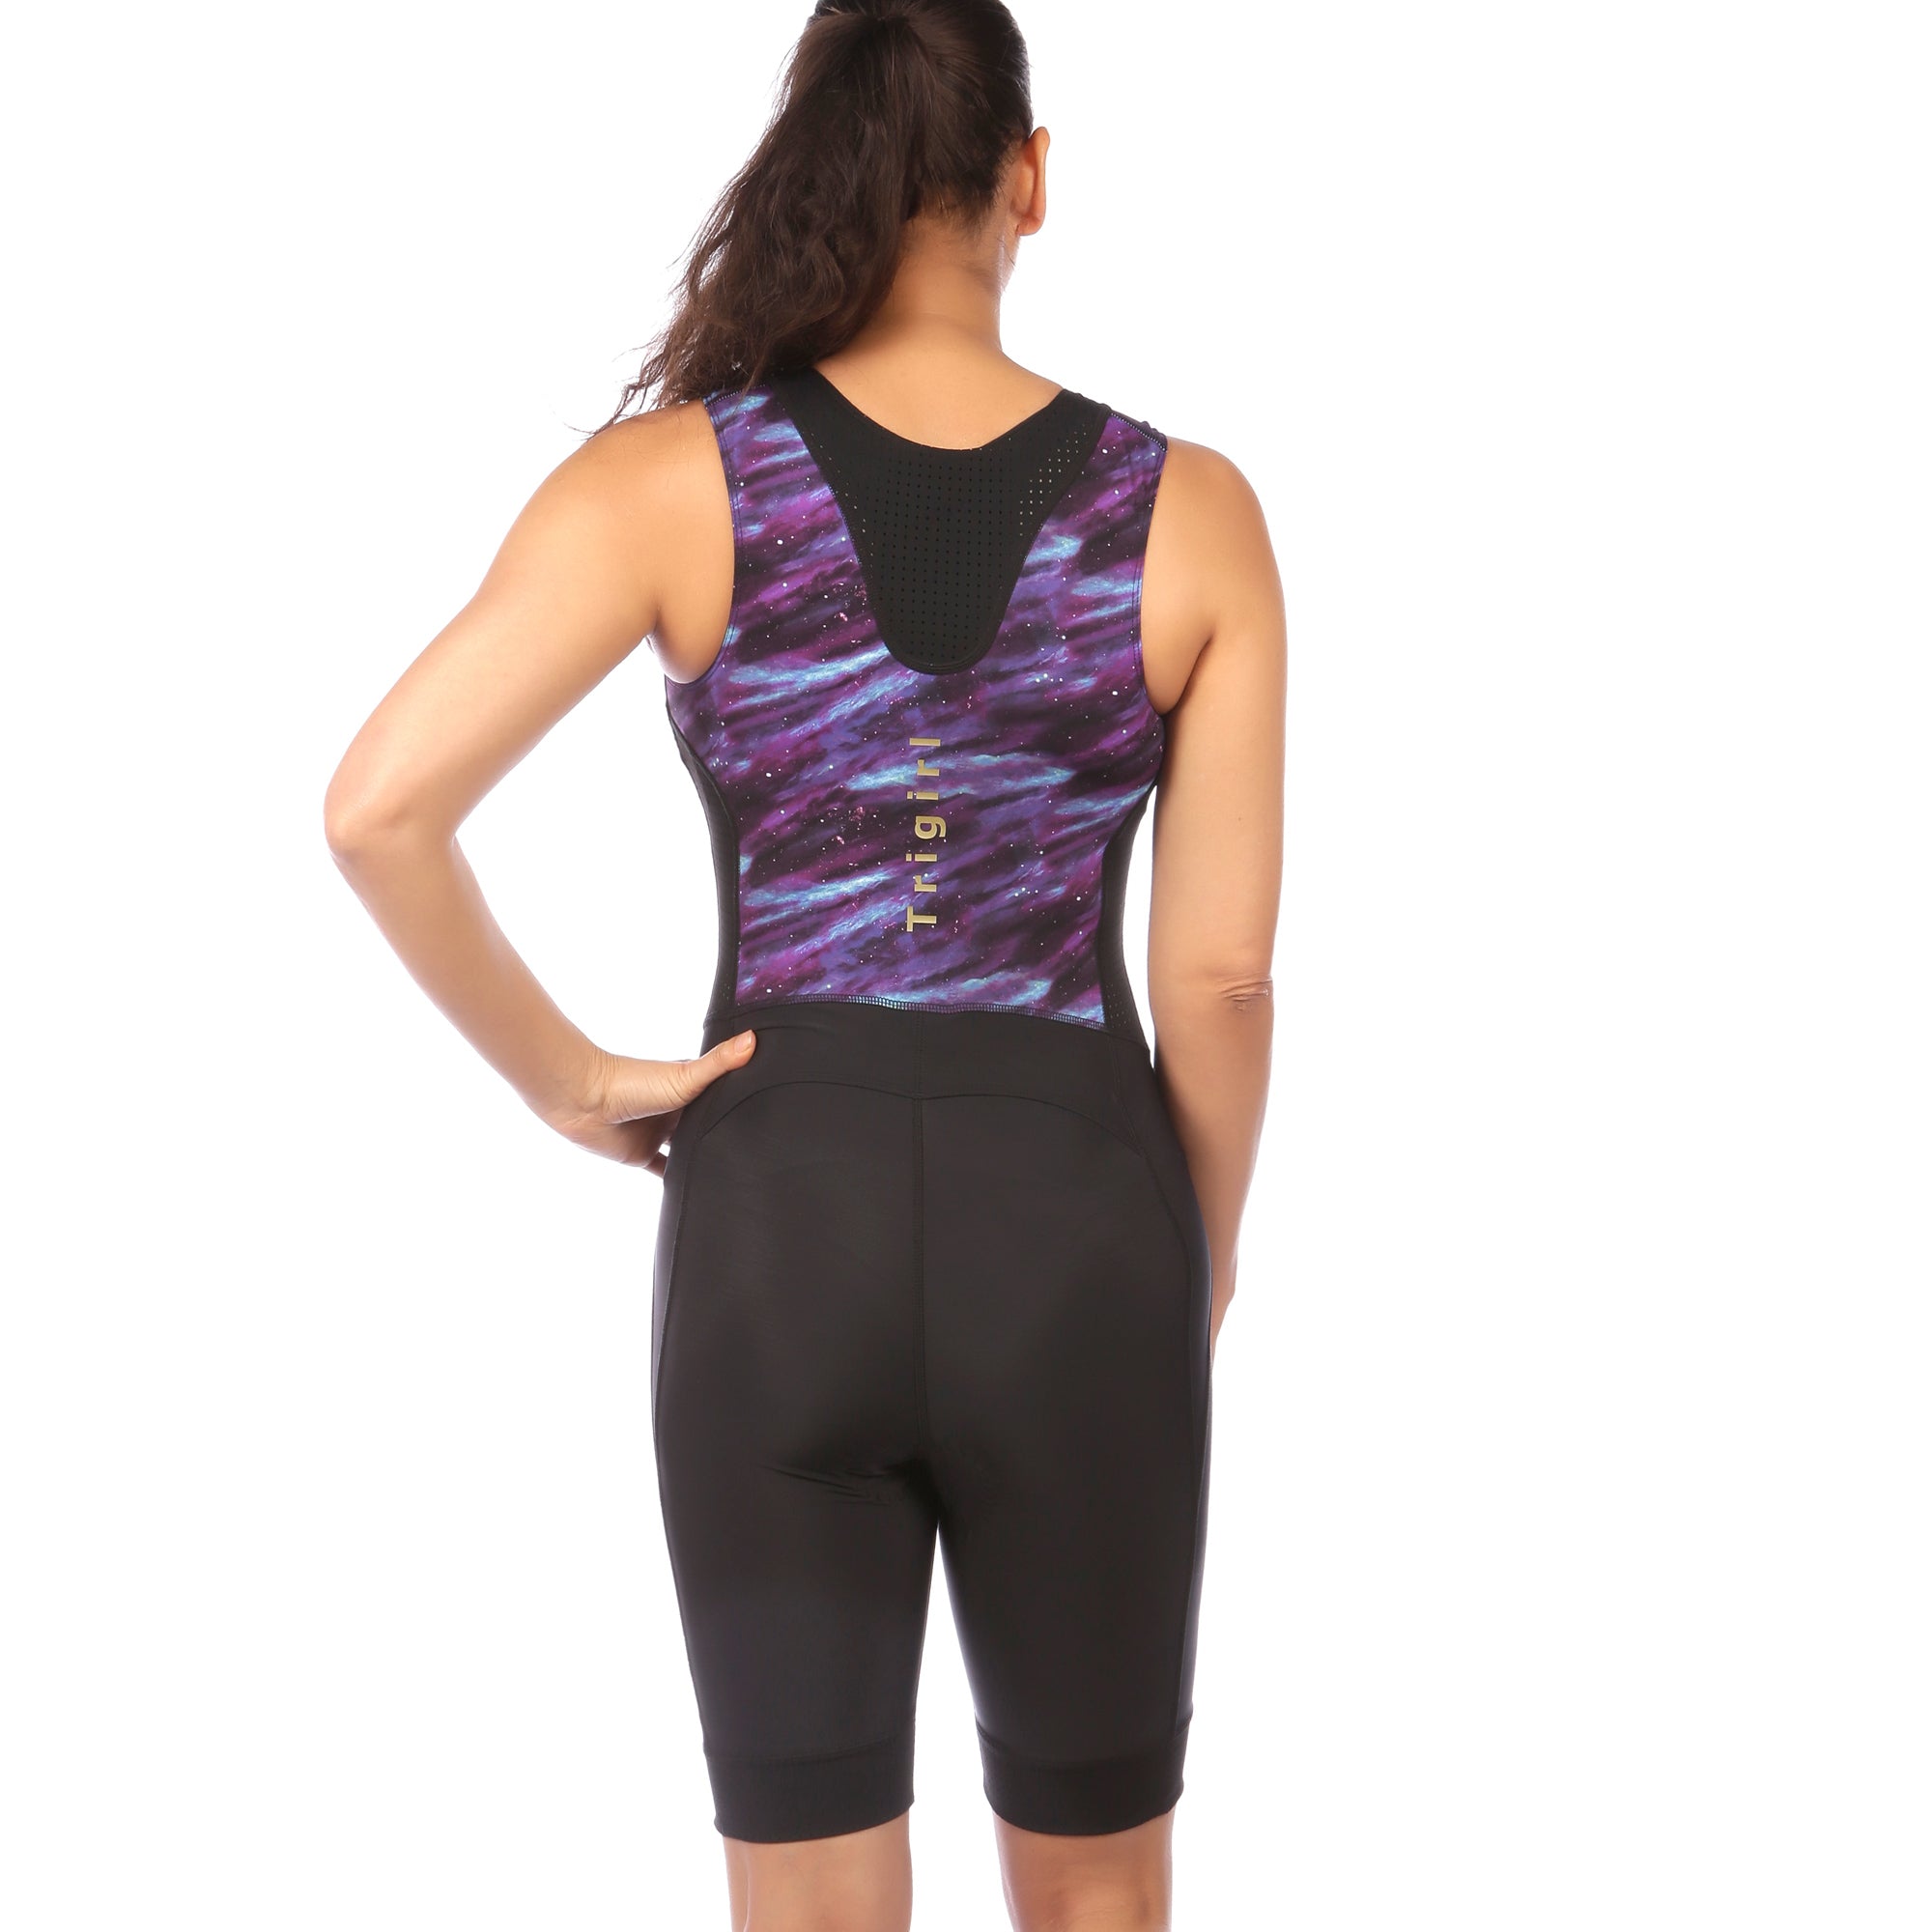 Ritzy Trisuit with/ without Support in Purple Galaxy - L